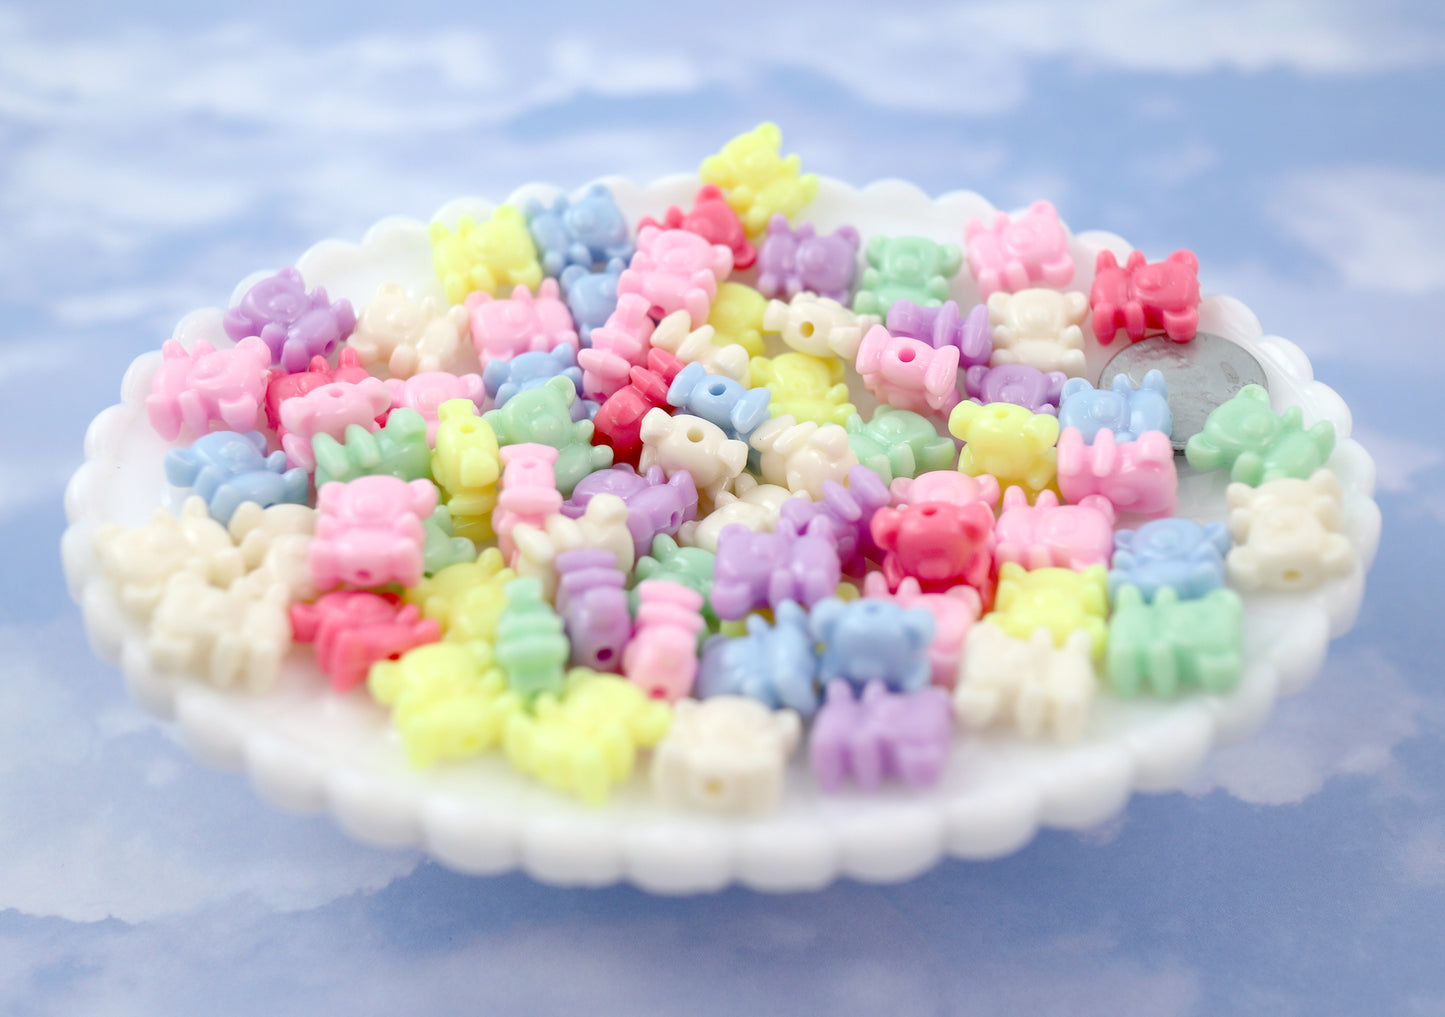 Pastel Beads - 12mm Tiny Pastel Teddy Bear Bright Color Acrylic or Plastic Beads - 80 pc set